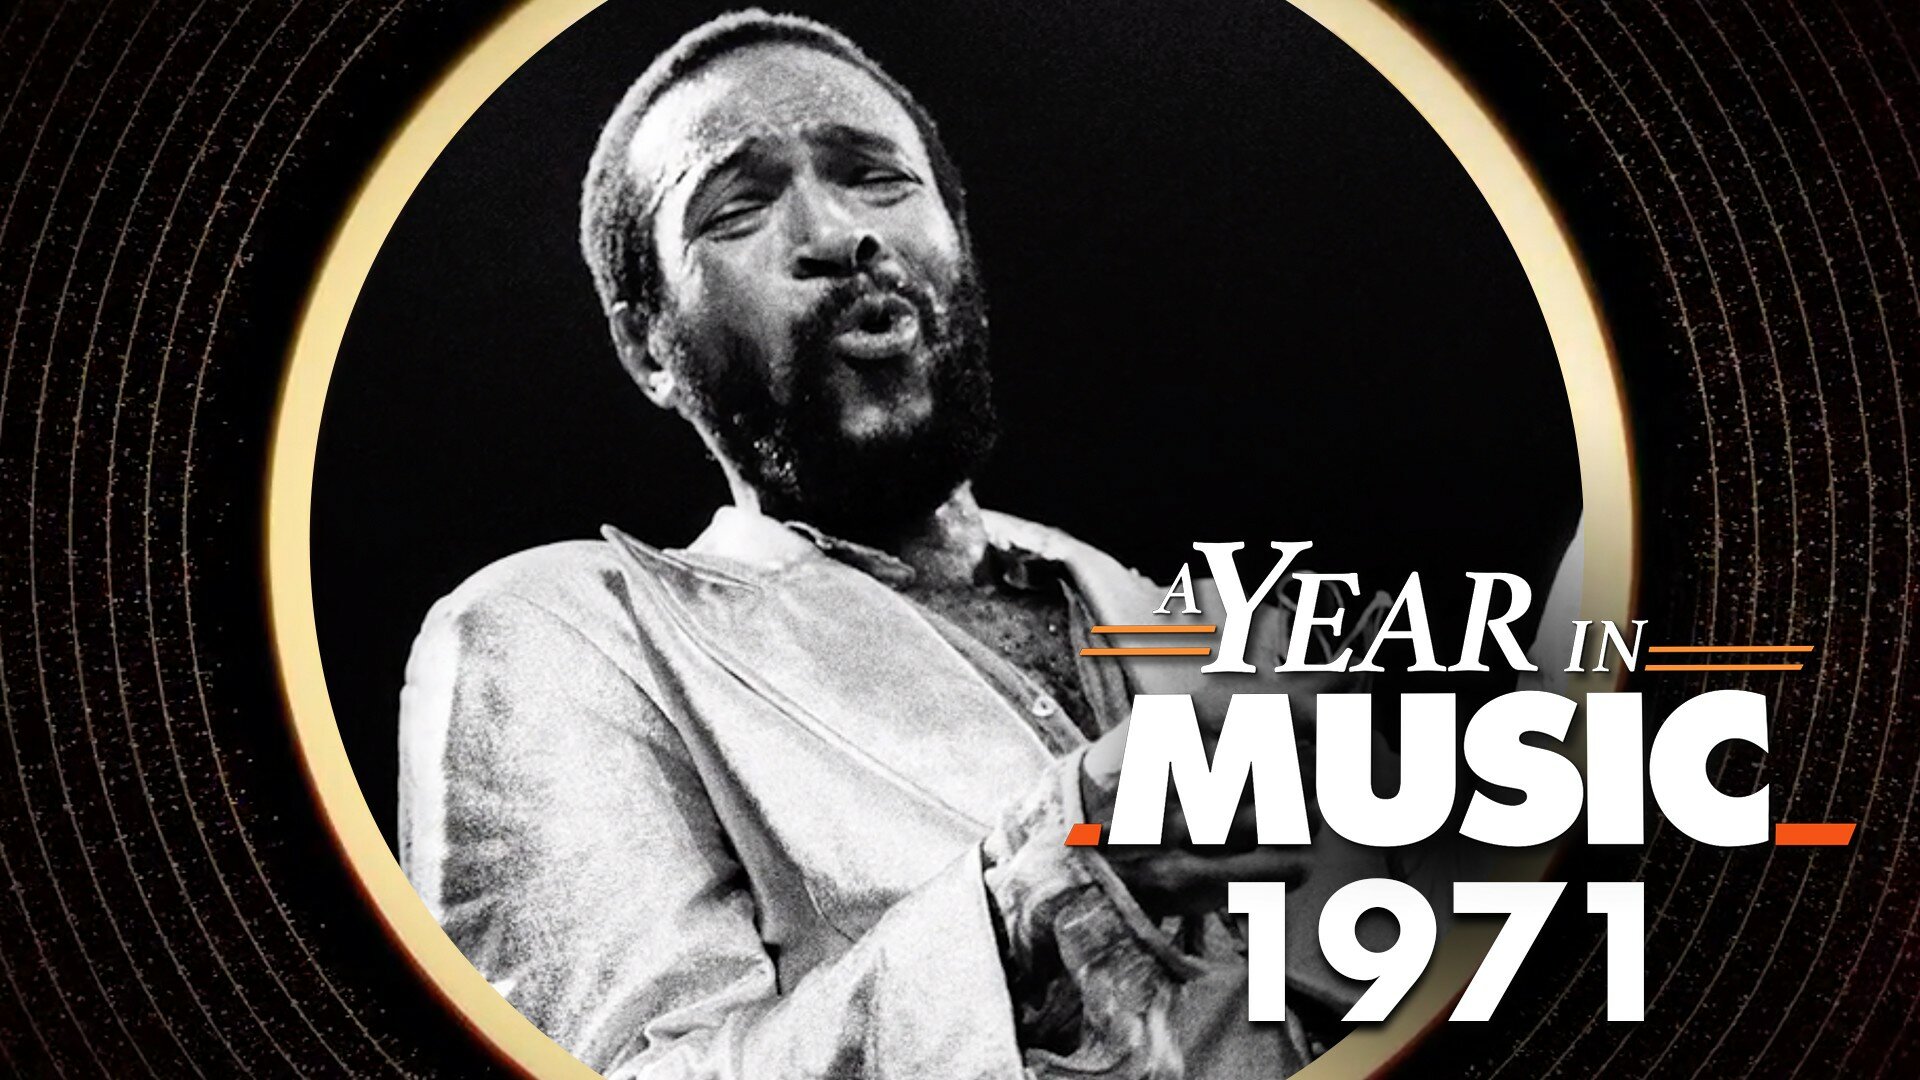 A Year in Music S2E5 1971